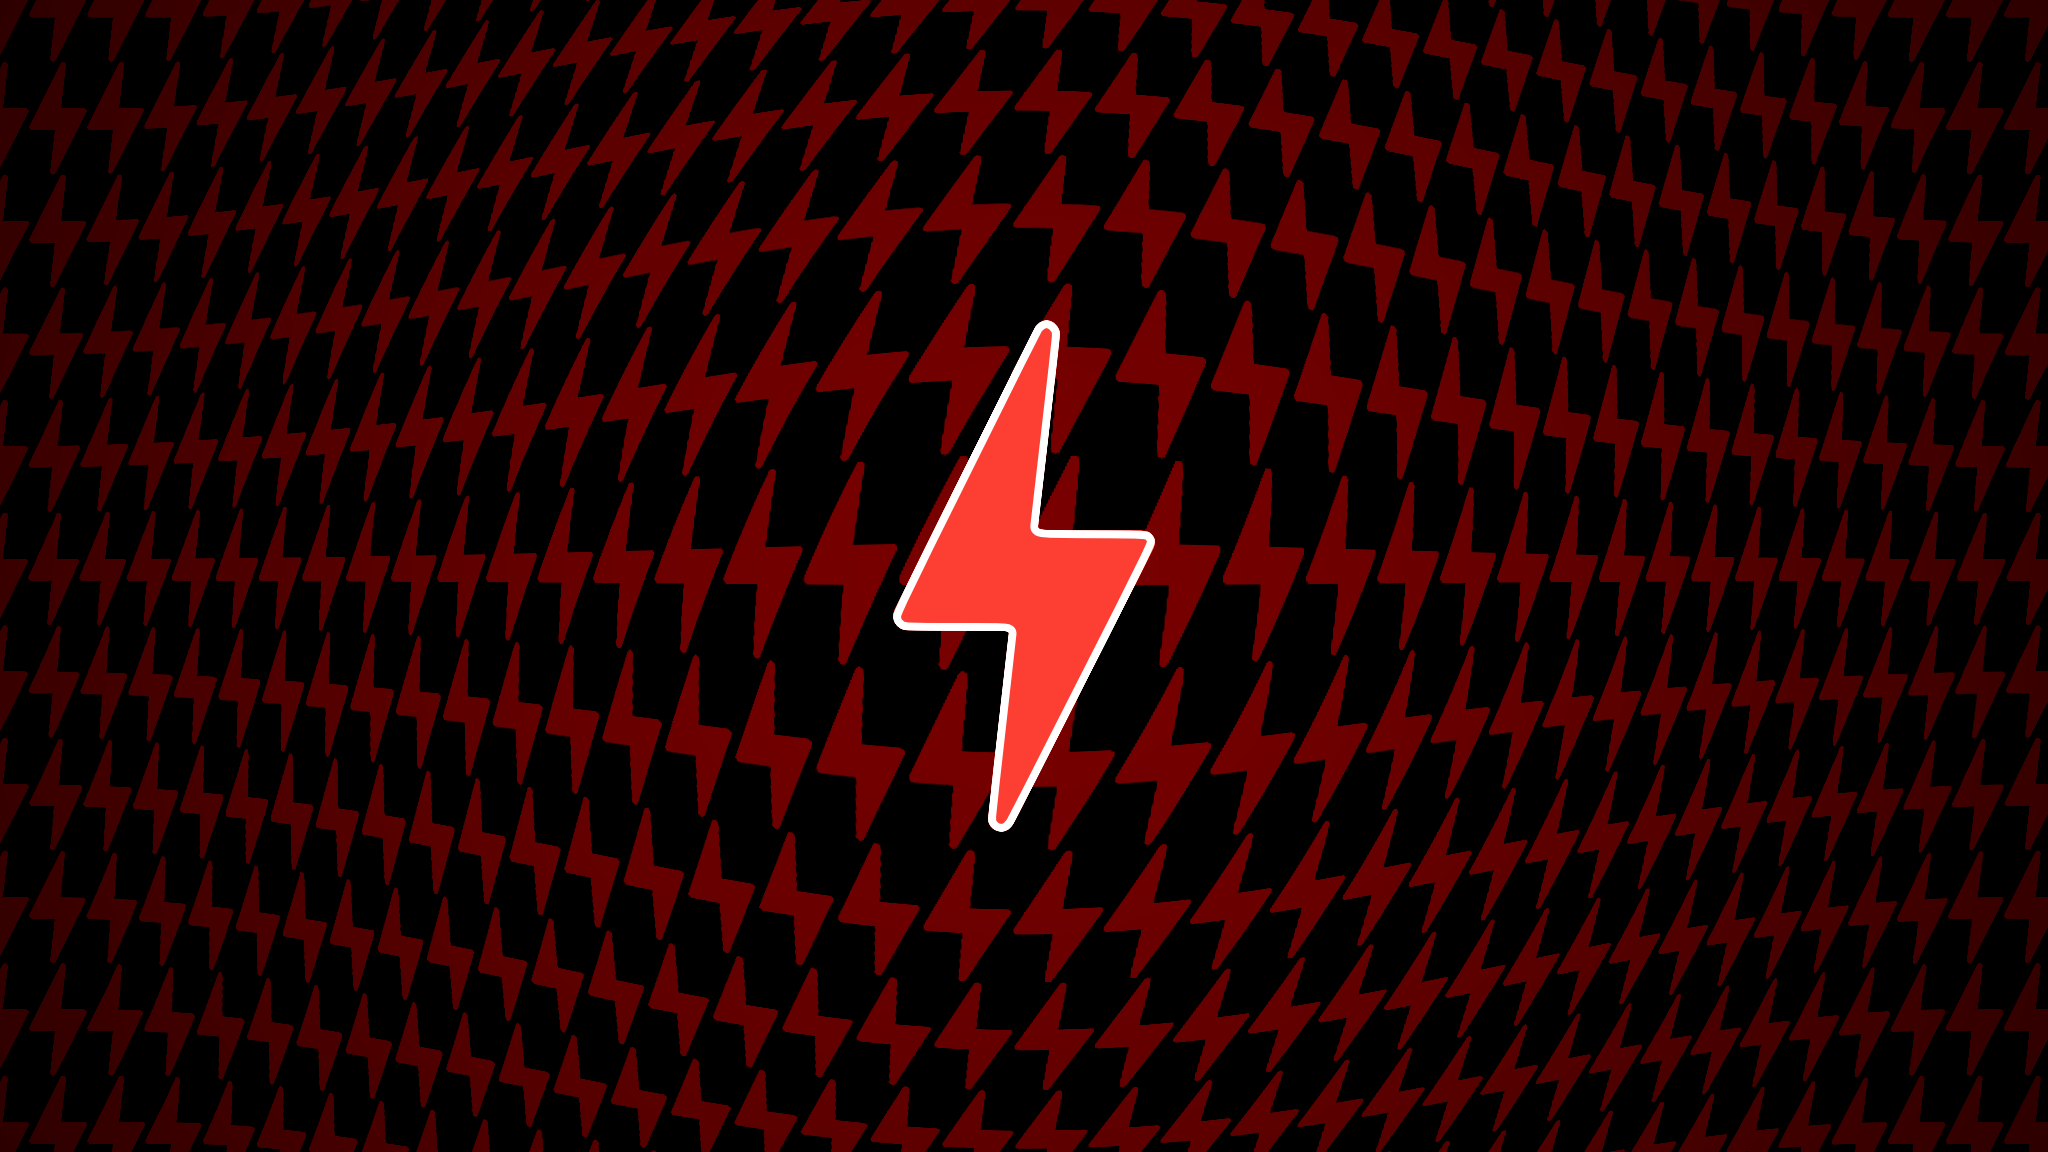 An image showing a red power icon in the middle, set against a dark-patterned, slightly distorted background